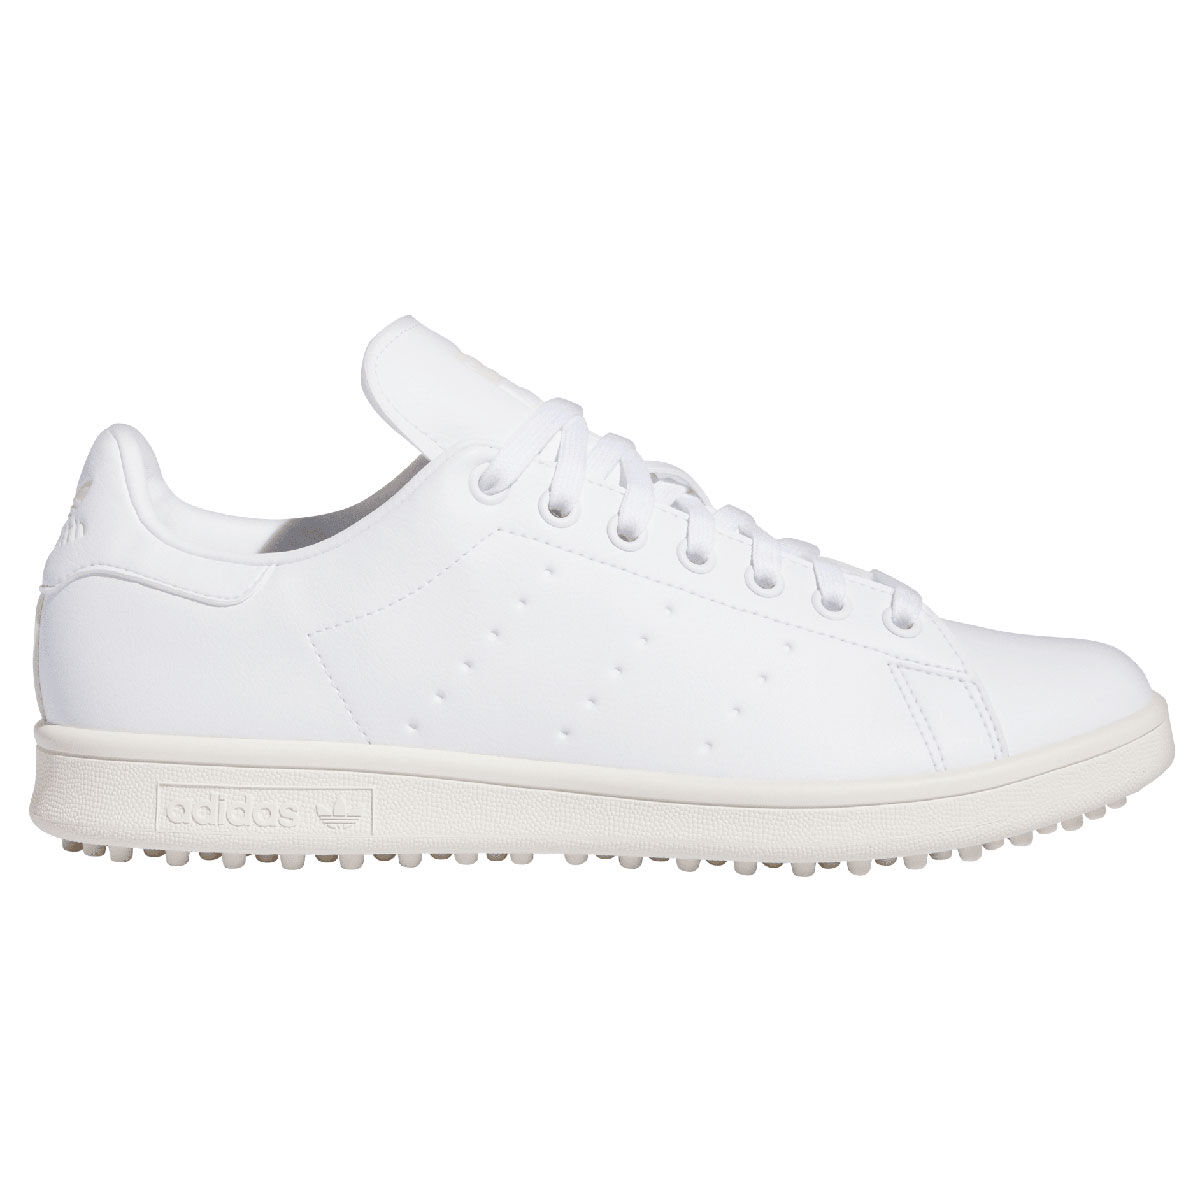 adidas Men’s Stan Smith Waterproof Spikeless Golf Shoes, Mens, White/off white/white, 7 | American Golf